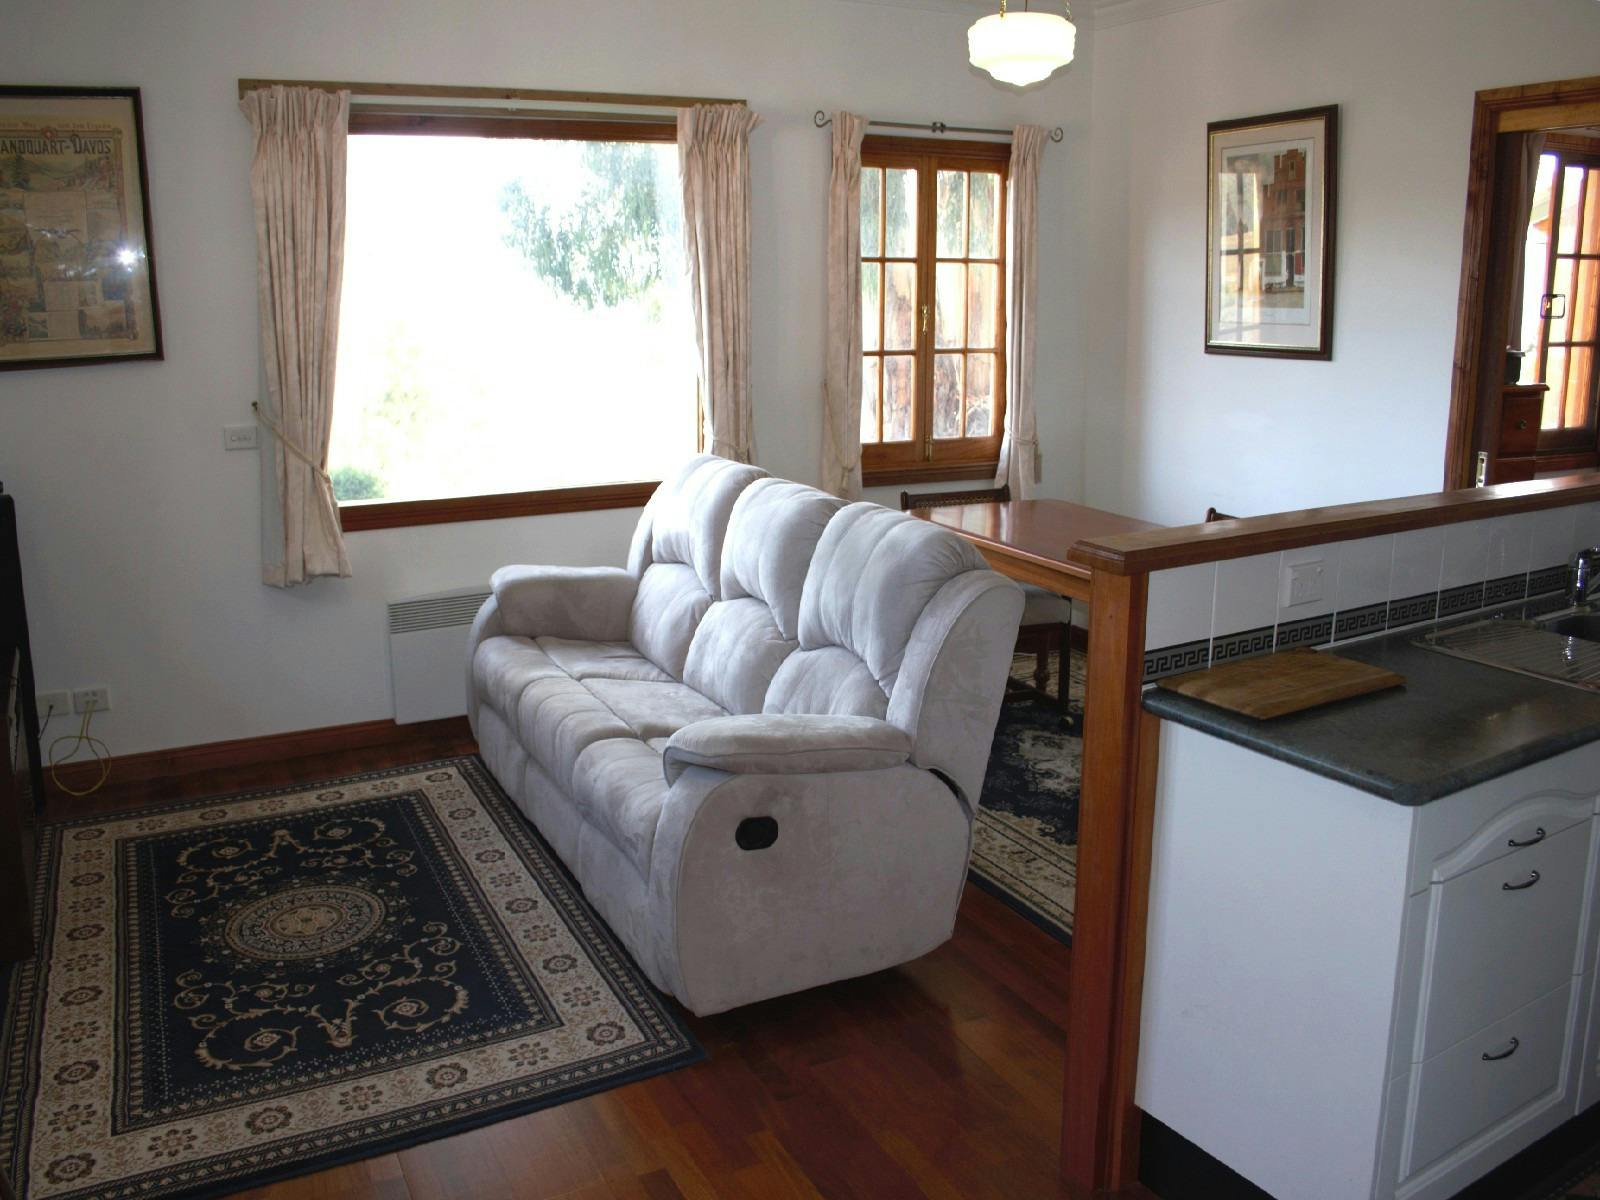 Main living area, couch, galley kitchen, open plan, timber floor, main window,dining table